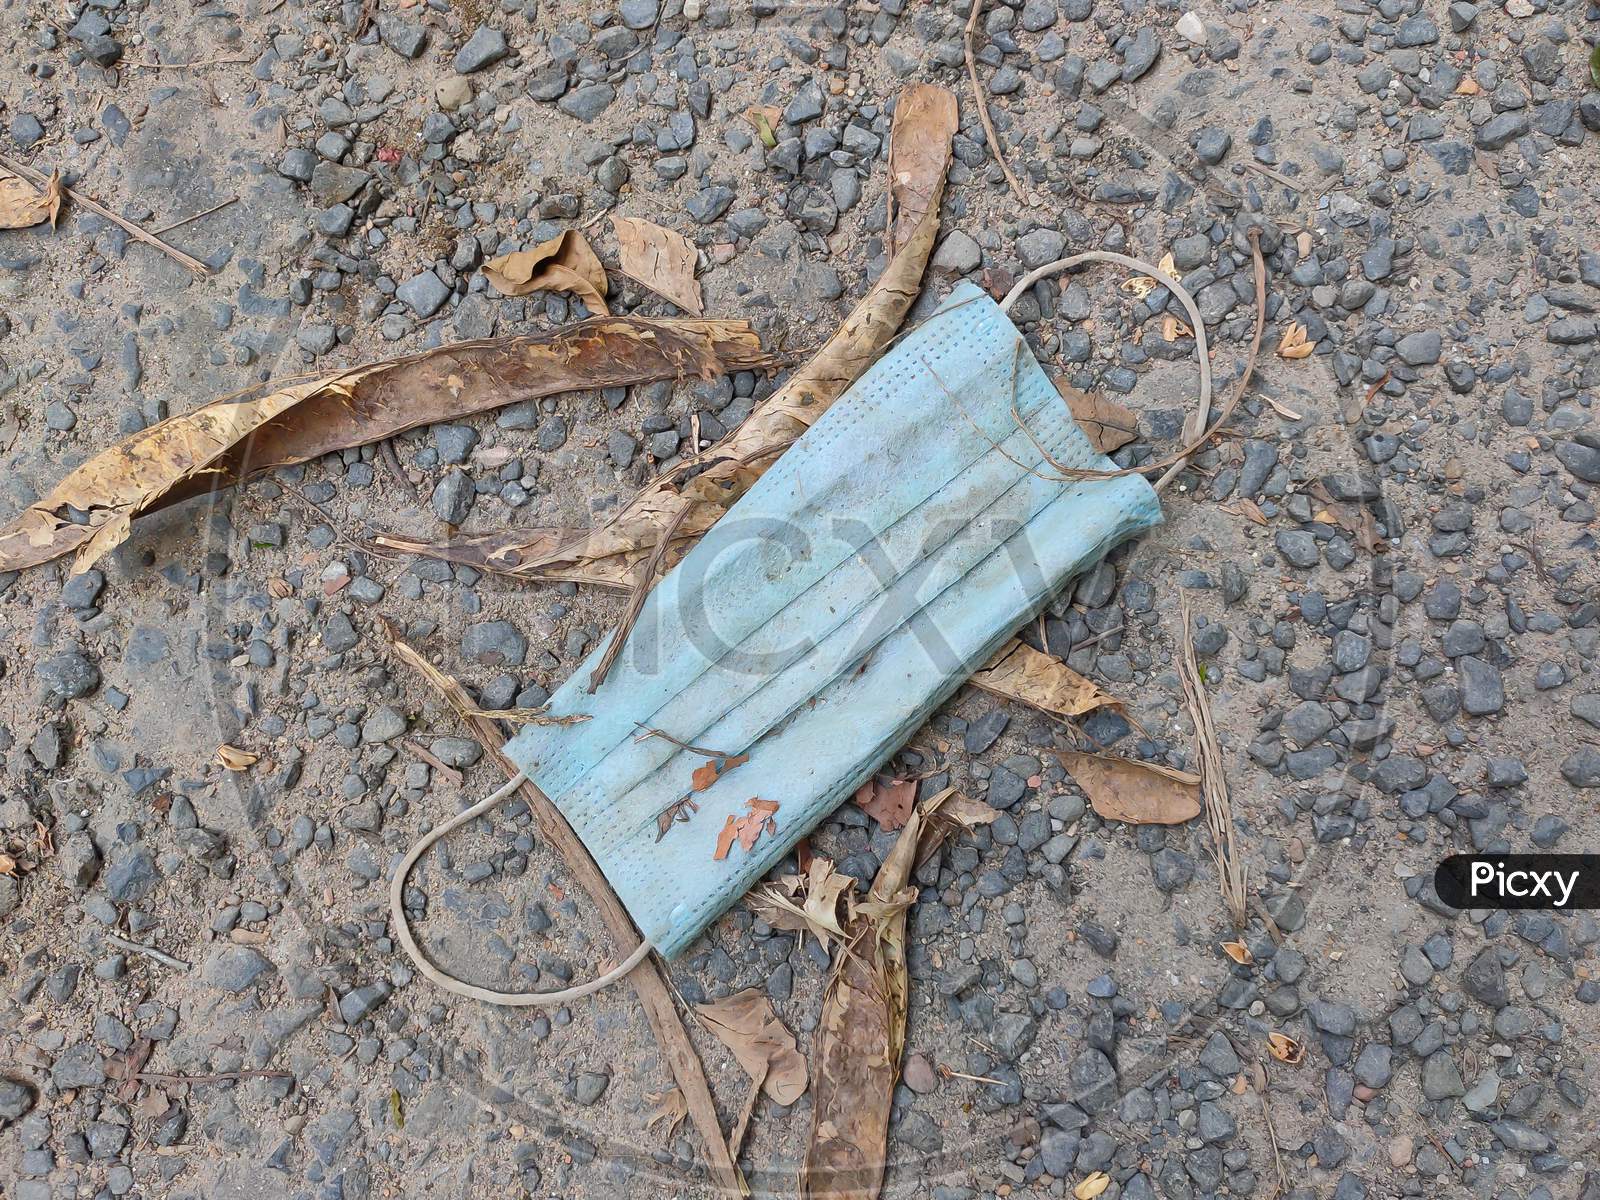 The Environmental Impact Of Abandoned Disposable And Used Face Masks On Street.